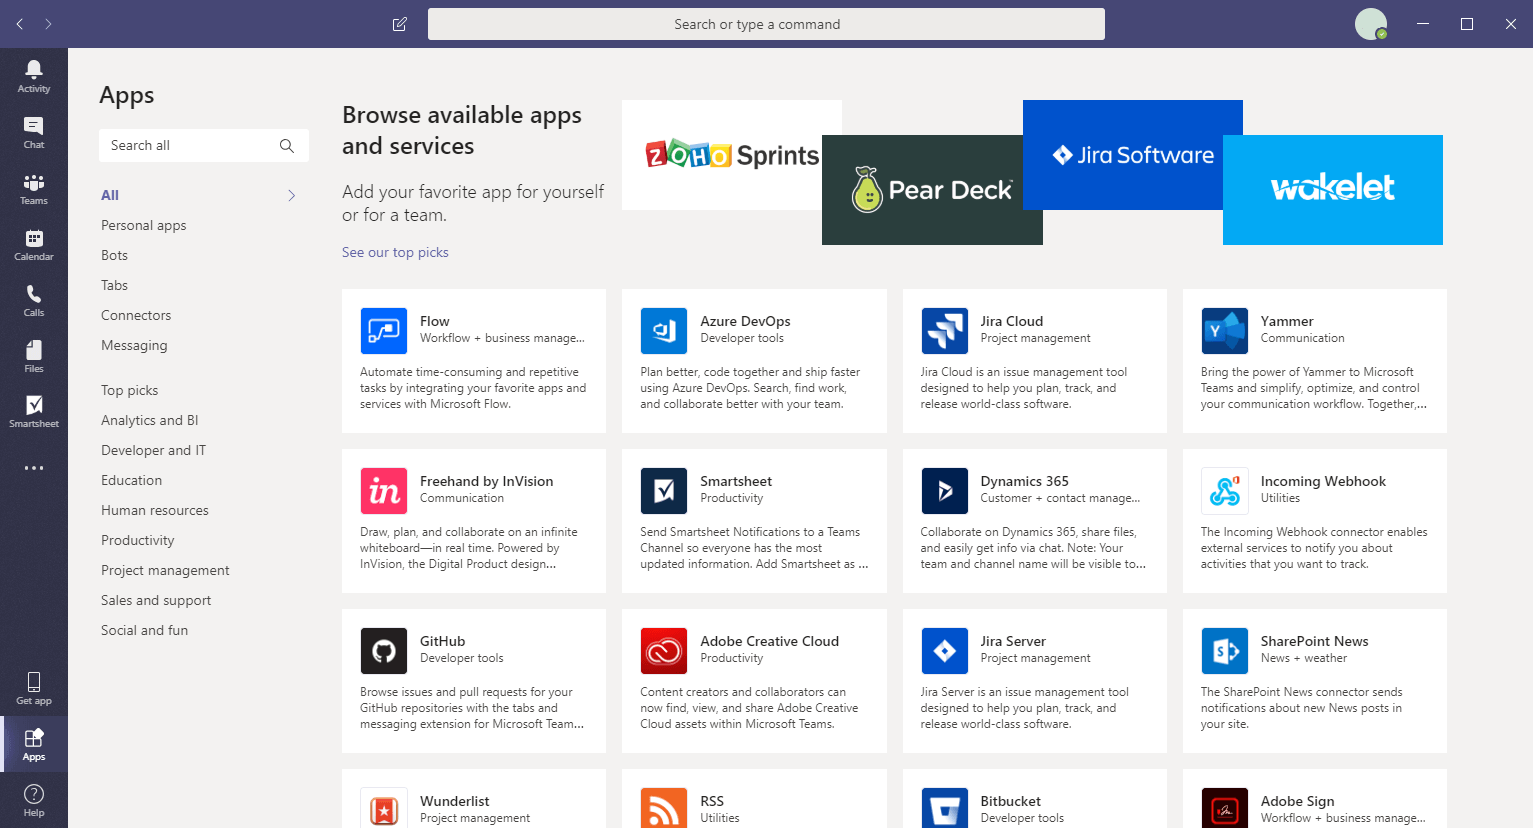 Apps that can be integrated into Microsoft Teams